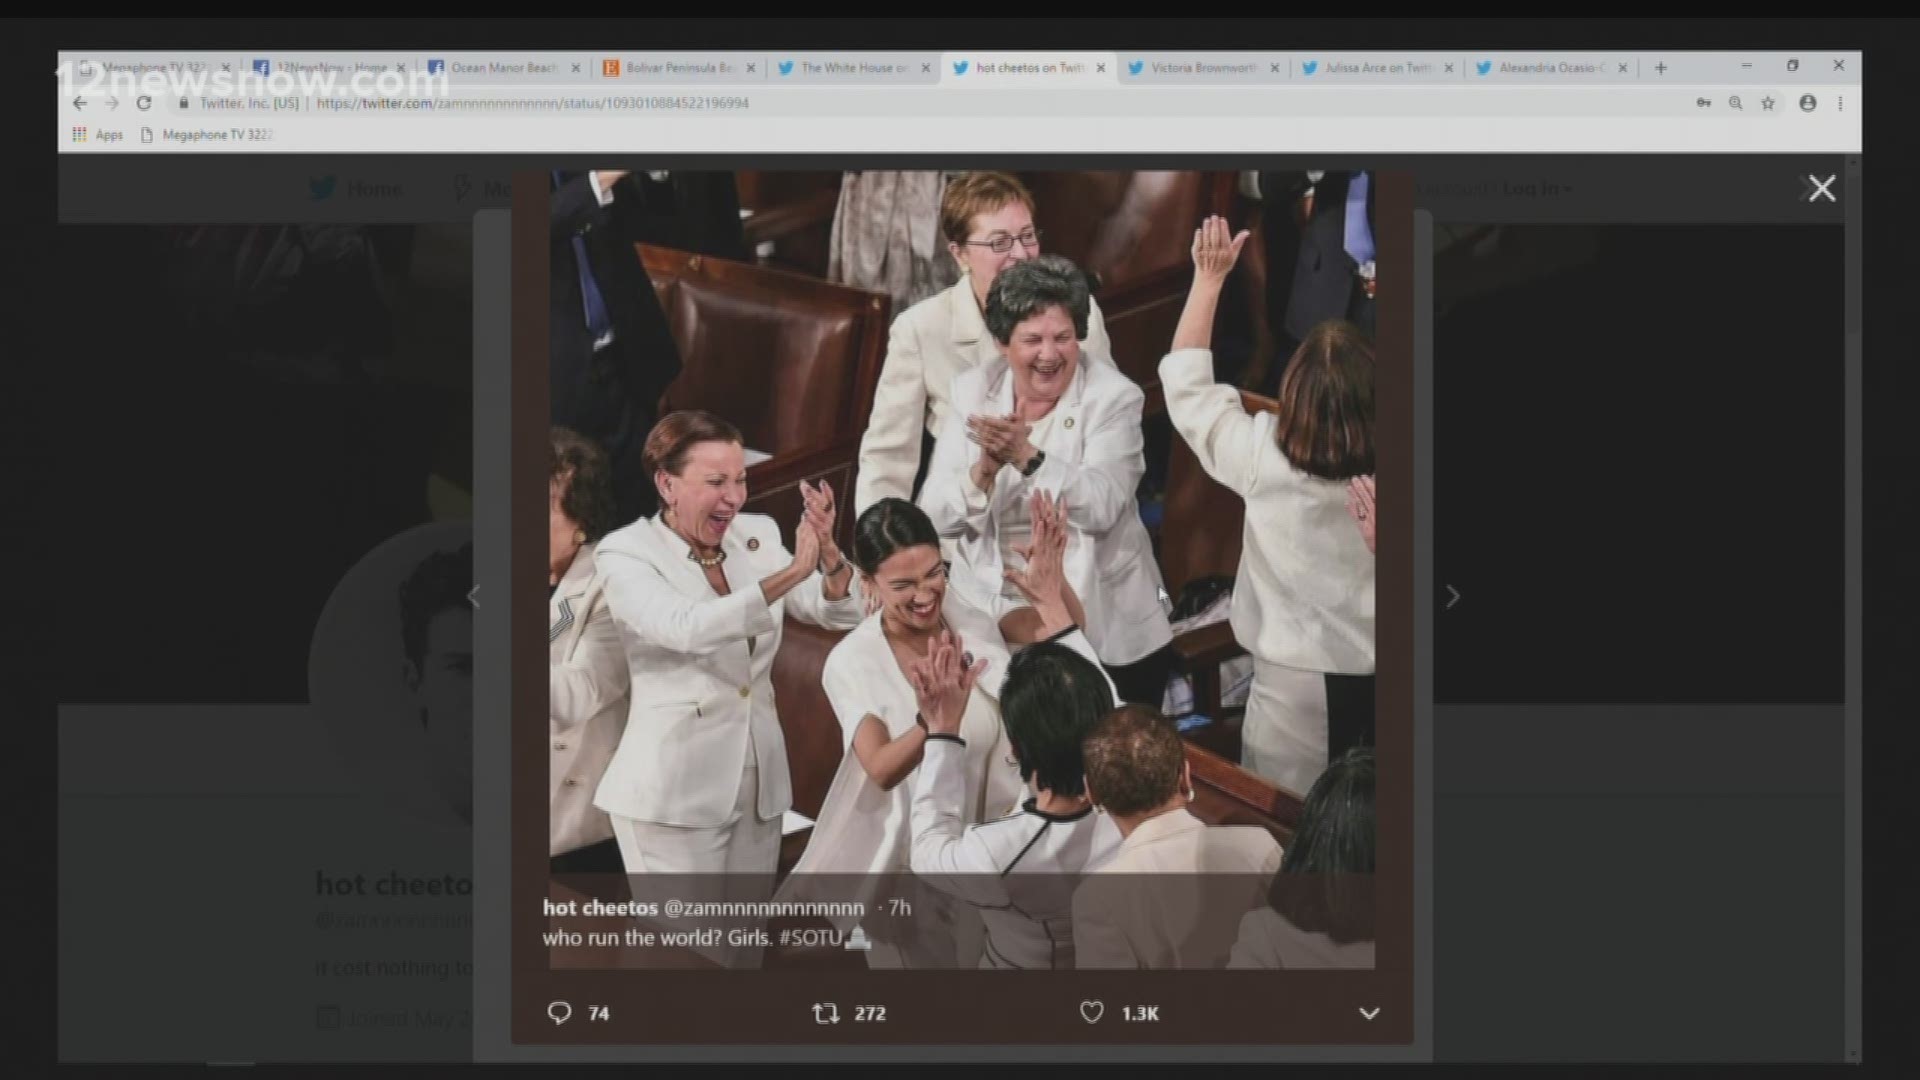 People take to the internet to share their opinions on the democratic congresswomen wearing white during the State of the Union Address to show unity for women's suffrage.